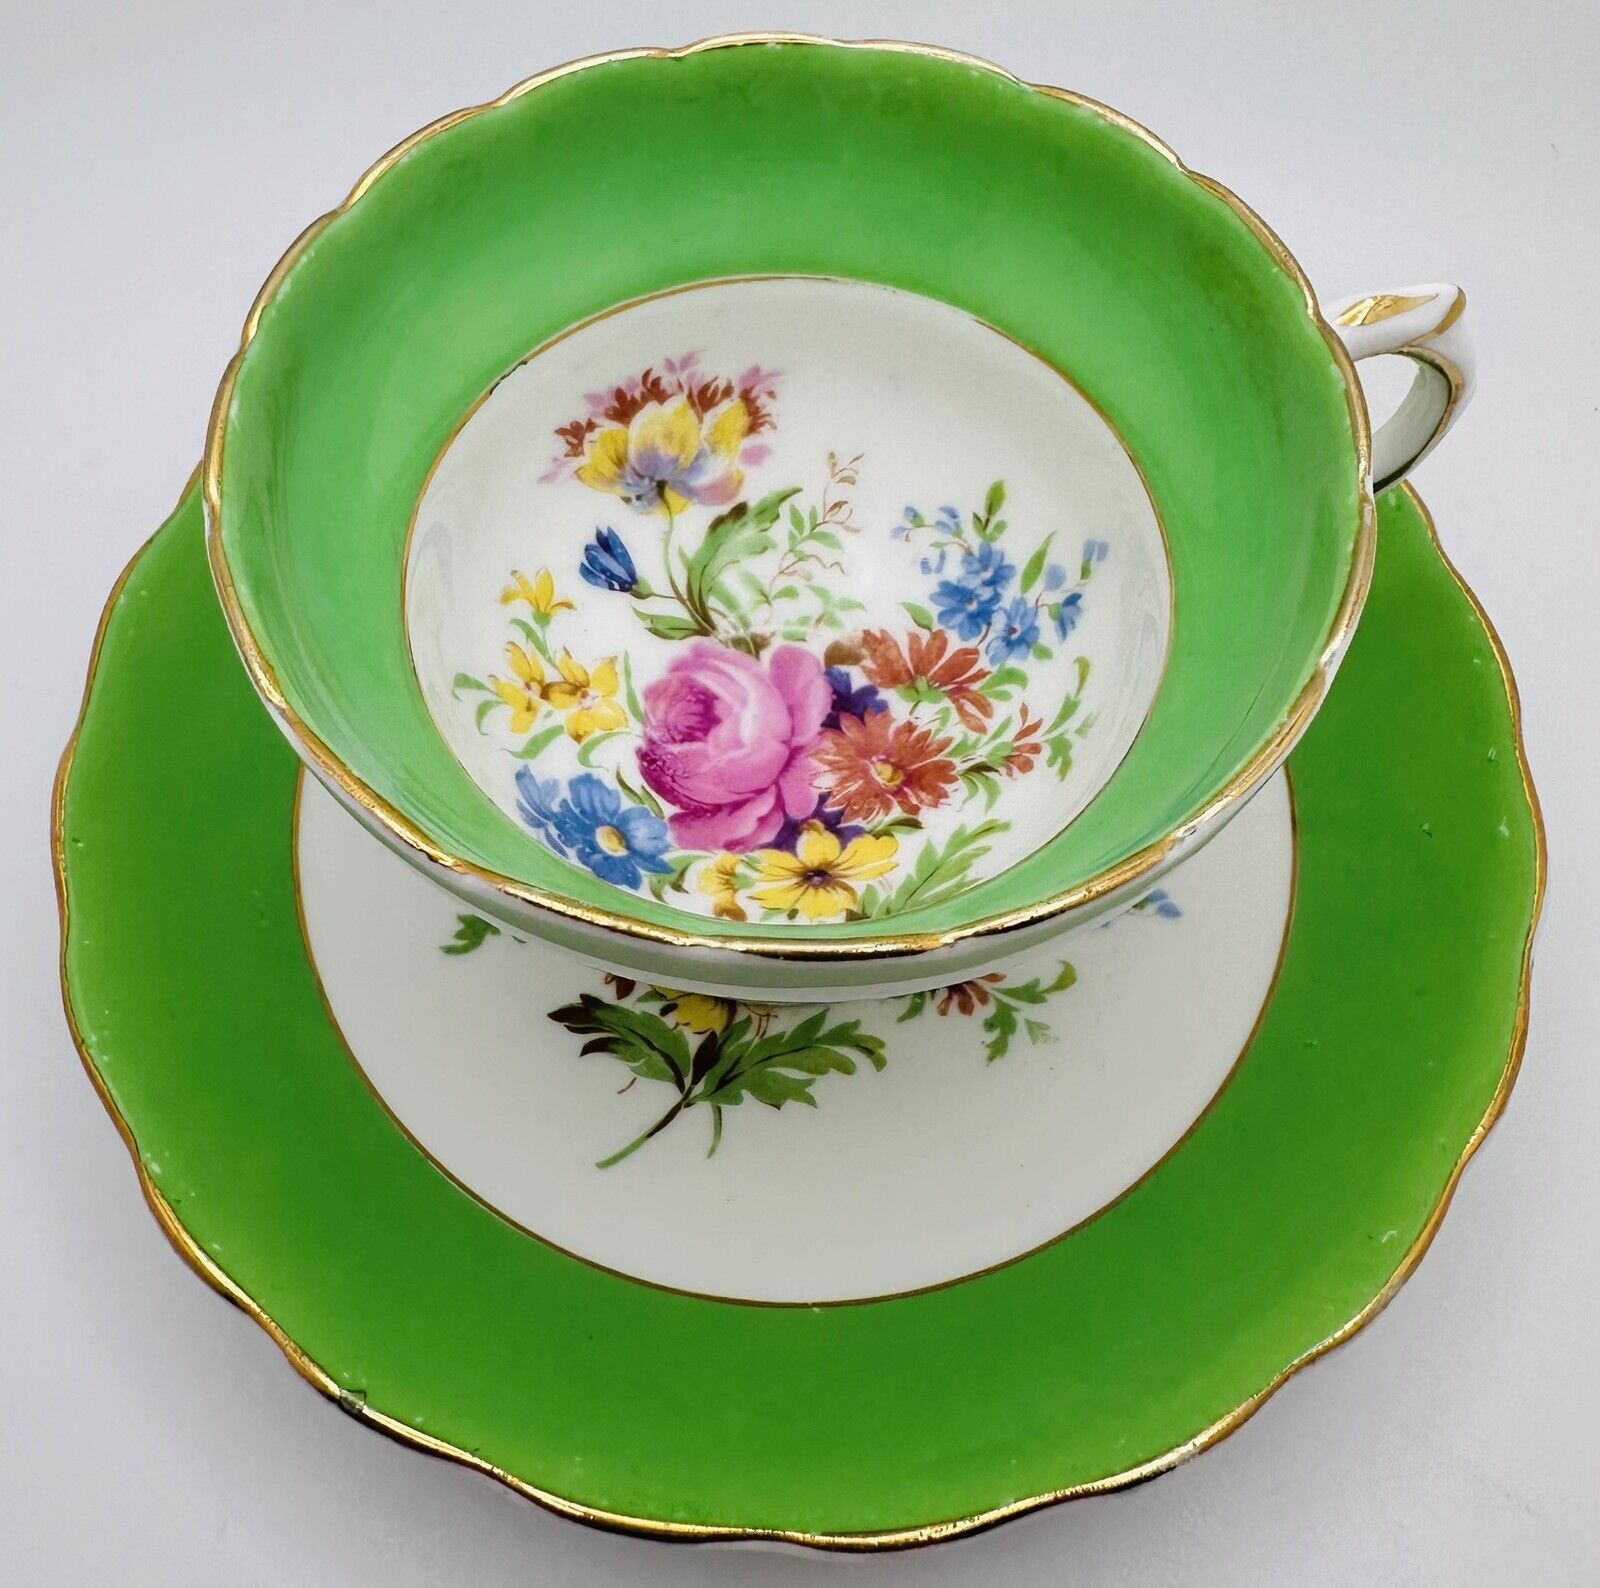 Vintage Rosina England Cup & Saucer Footed Green Rose Floral Bouquet Teacup